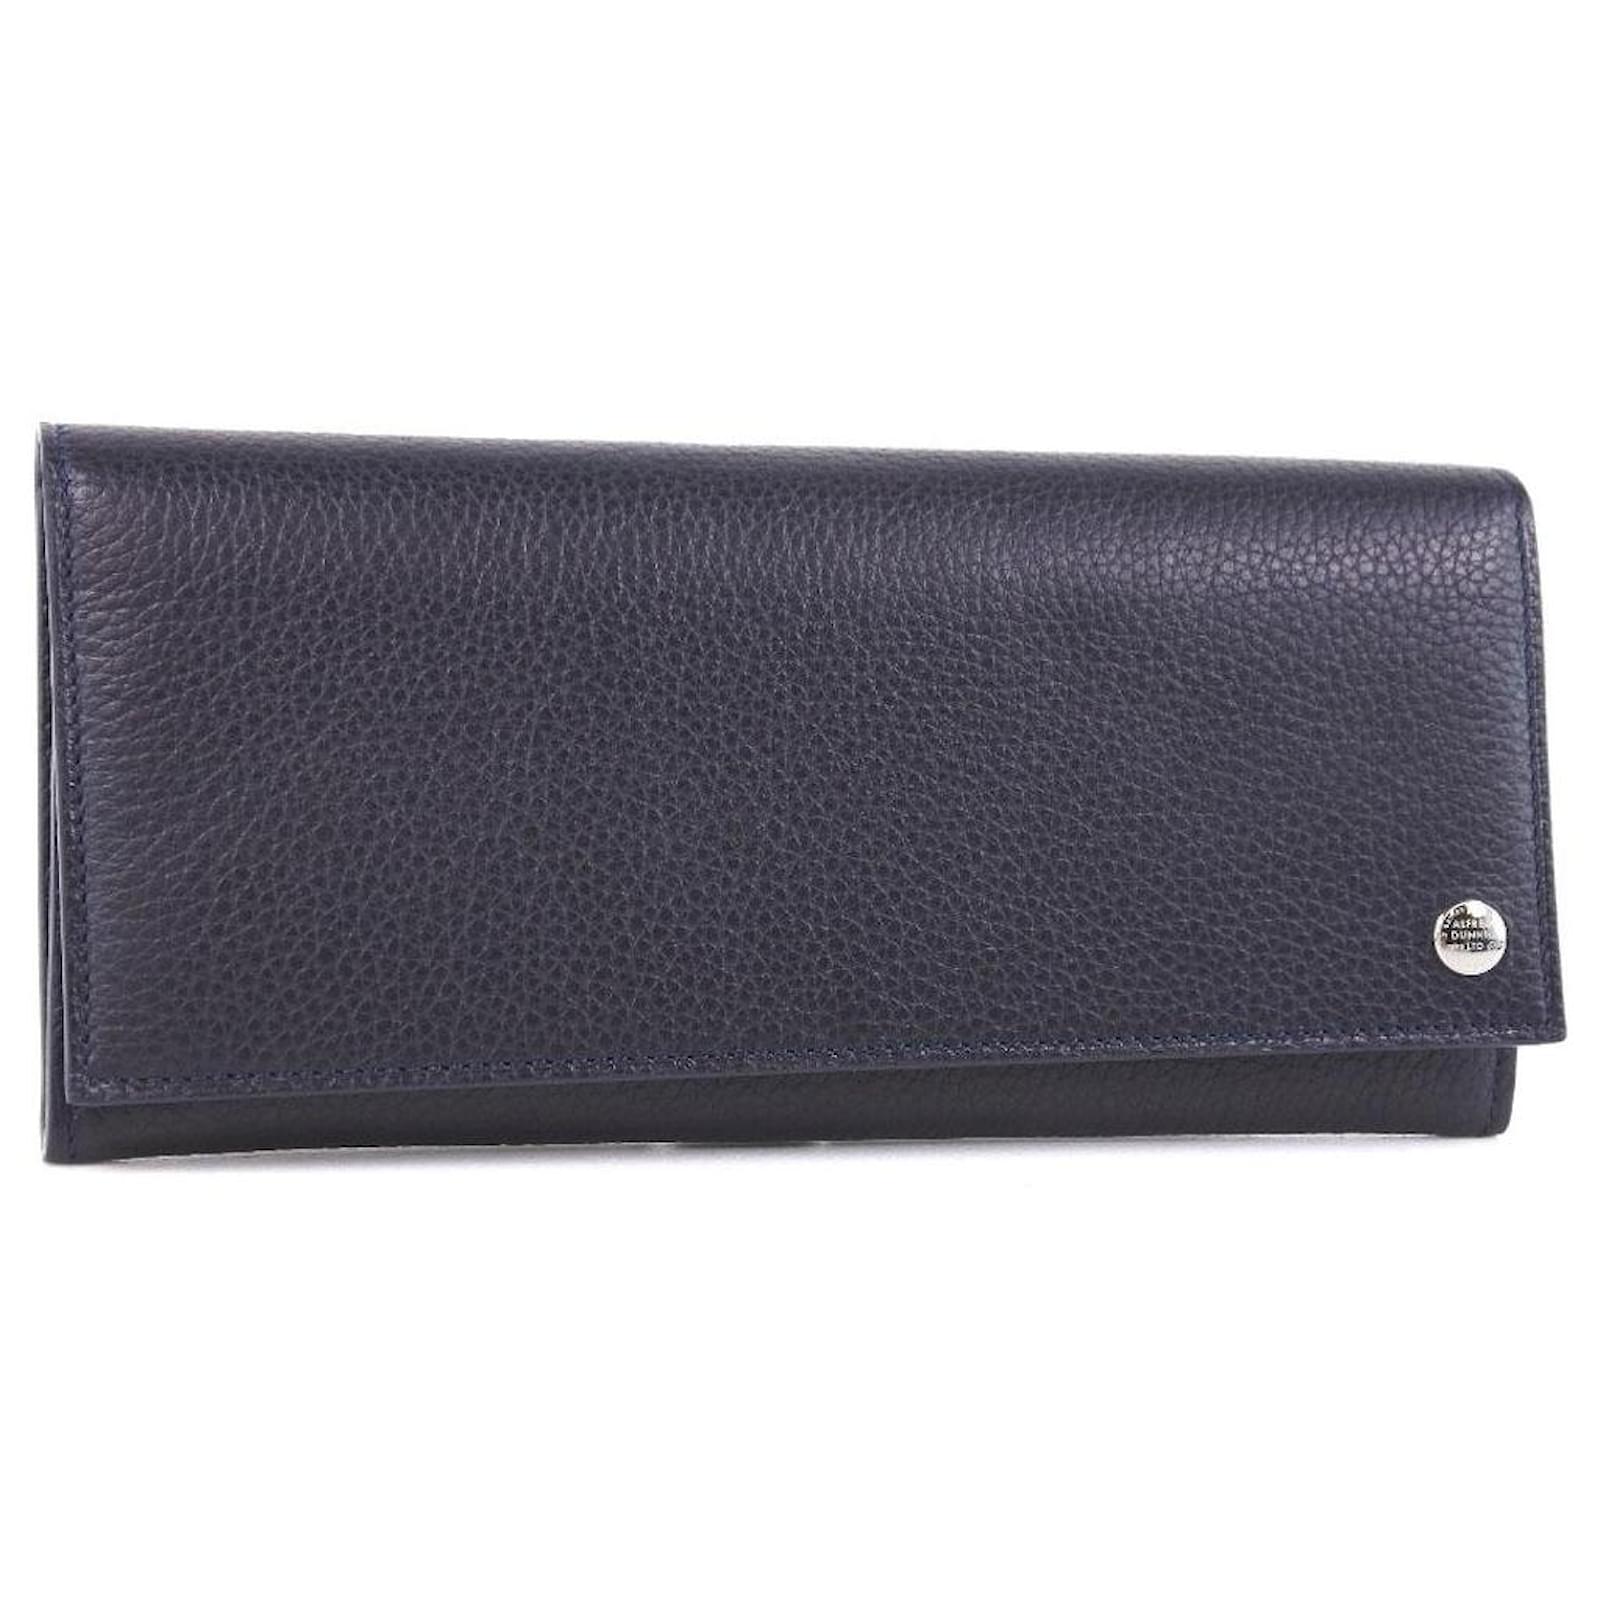 Alfred Dunhill dunhill Wallet Black Leather ref.371799 - Joli Closet